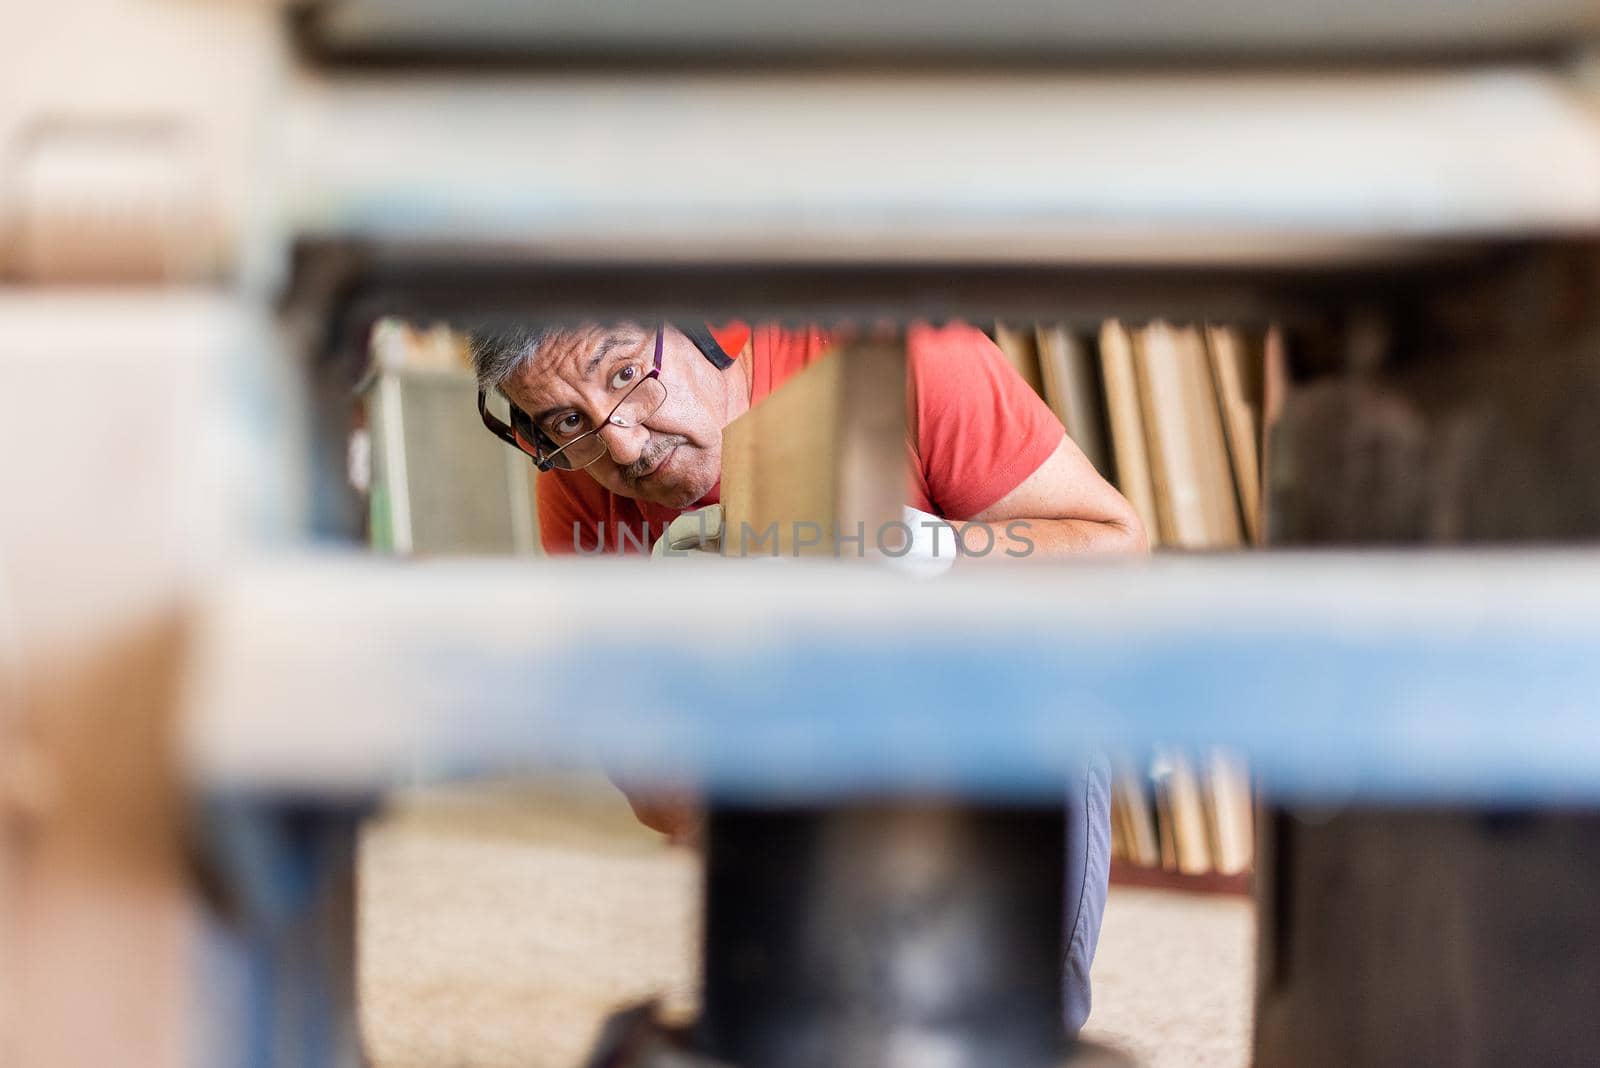 Male adult in red T-shirt and glasses working with a wood planer, background in focus